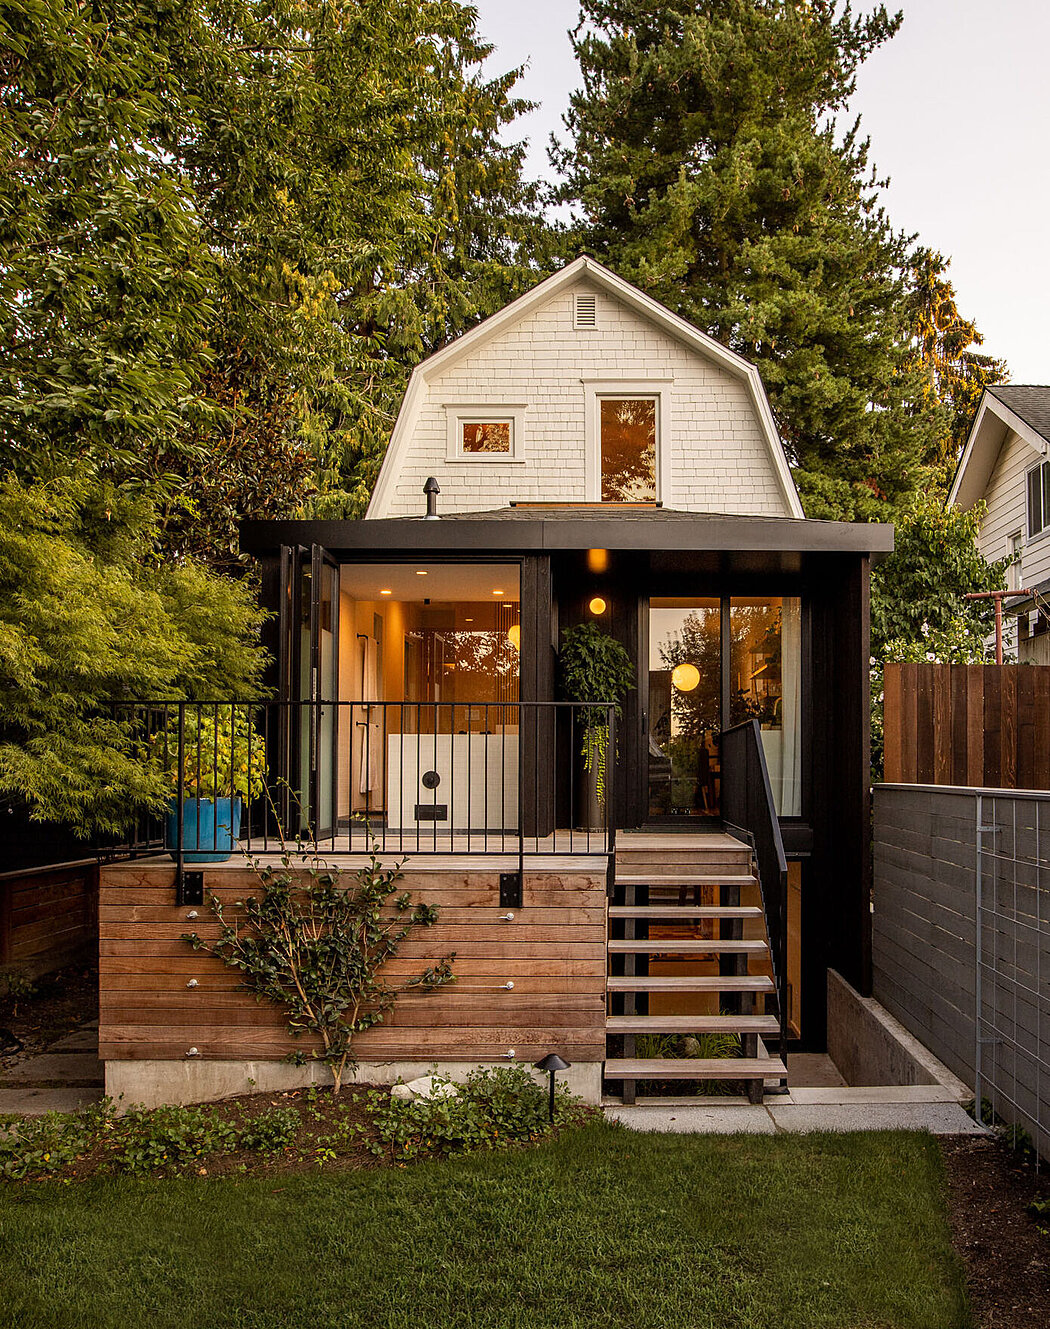 A cozy two-story home with a modern black and wooden porch at dusk.